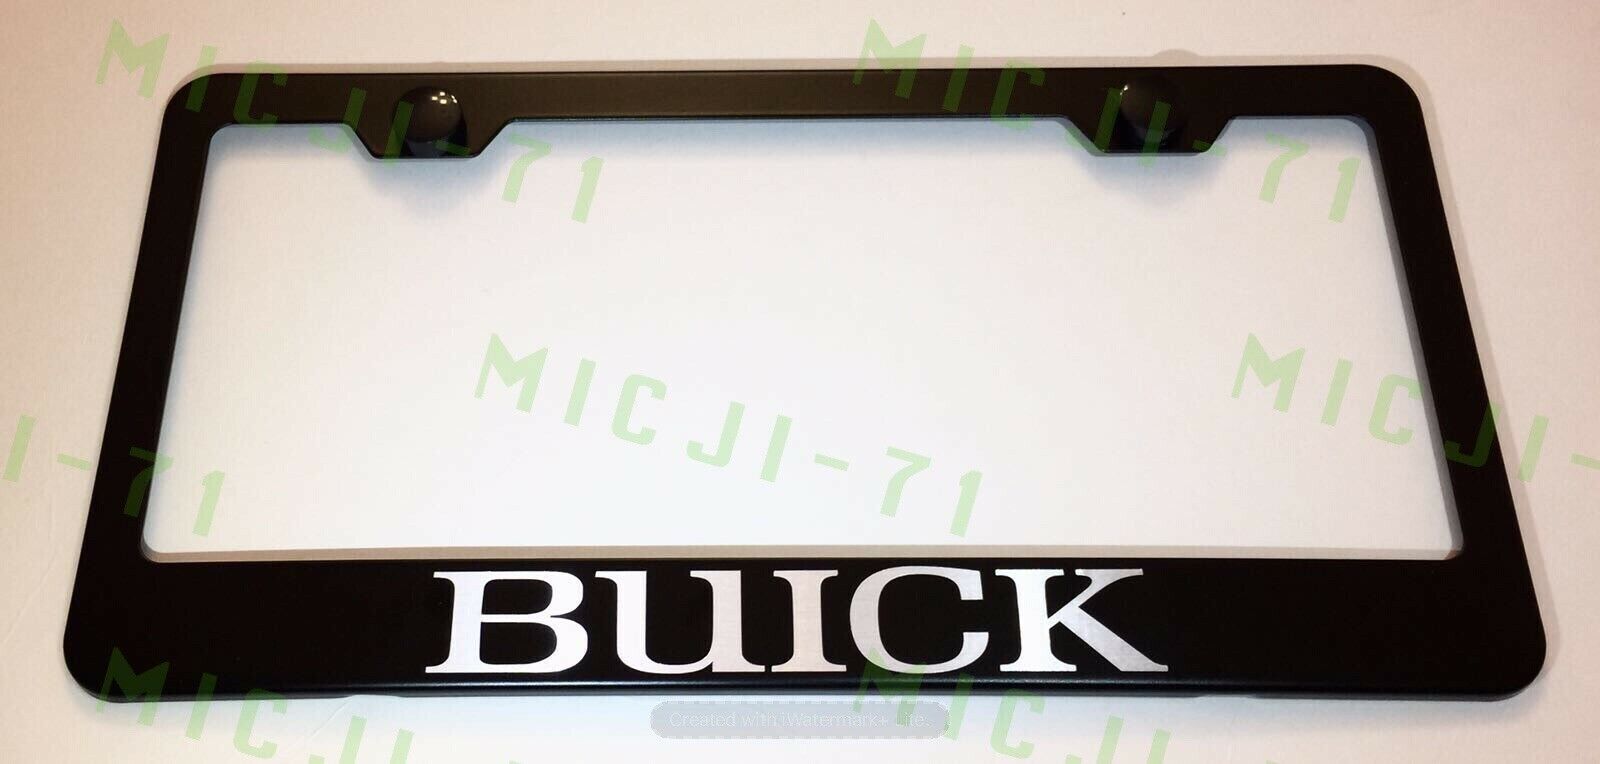 Buick Stainless Steel License Plate Frame Holder Rust Free - $12.99